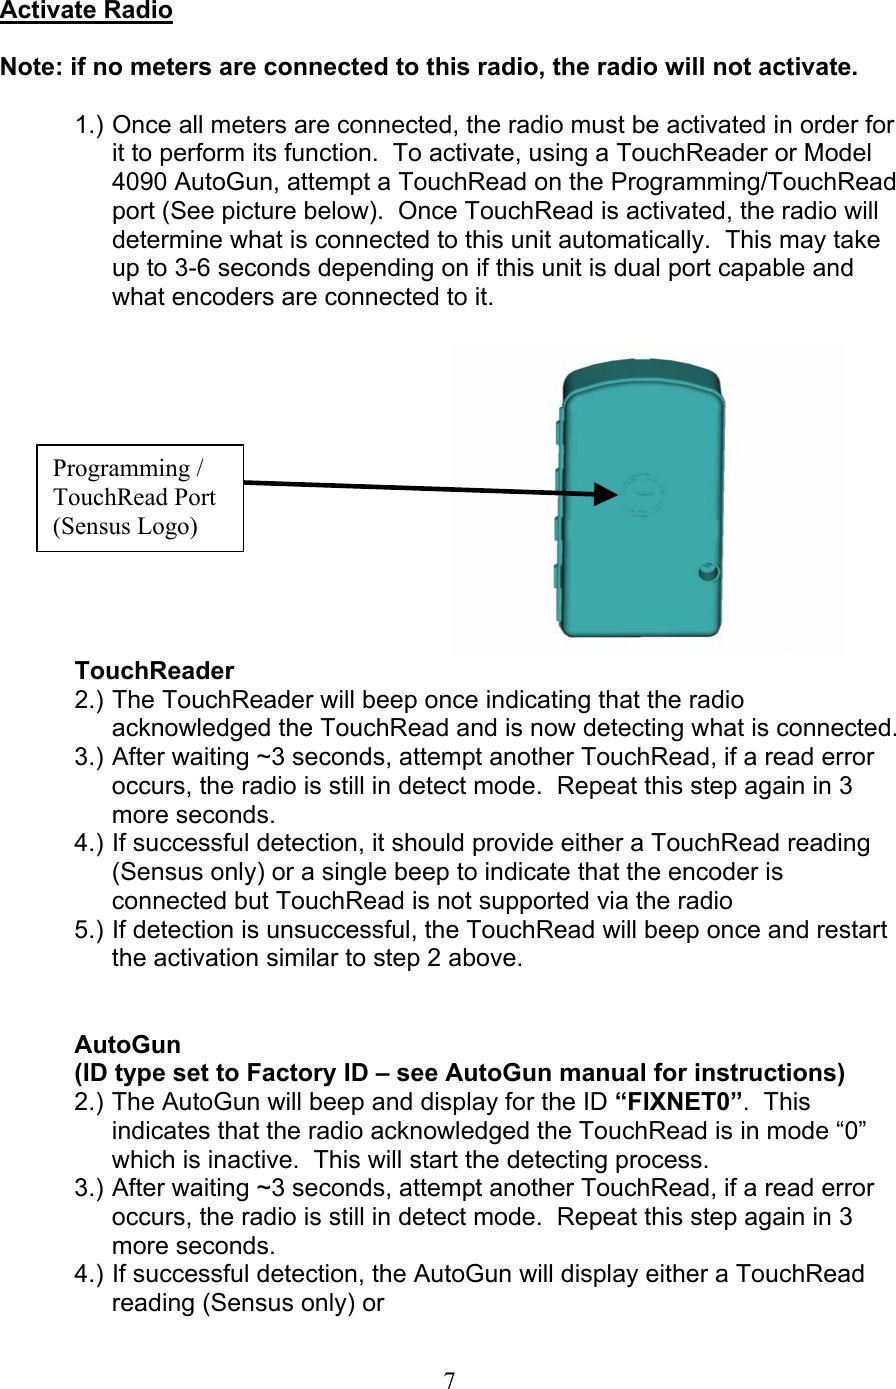  7Activate Radio  Note: if no meters are connected to this radio, the radio will not activate.  1.) Once all meters are connected, the radio must be activated in order for it to perform its function.  To activate, using a TouchReader or Model 4090 AutoGun, attempt a TouchRead on the Programming/TouchRead port (See picture below).  Once TouchRead is activated, the radio will determine what is connected to this unit automatically.  This may take up to 3-6 seconds depending on if this unit is dual port capable and what encoders are connected to it.              TouchReader 2.) The TouchReader will beep once indicating that the radio acknowledged the TouchRead and is now detecting what is connected. 3.) After waiting ~3 seconds, attempt another TouchRead, if a read error occurs, the radio is still in detect mode.  Repeat this step again in 3 more seconds. 4.) If successful detection, it should provide either a TouchRead reading (Sensus only) or a single beep to indicate that the encoder is connected but TouchRead is not supported via the radio 5.) If detection is unsuccessful, the TouchRead will beep once and restart the activation similar to step 2 above.   AutoGun  (ID type set to Factory ID – see AutoGun manual for instructions) 2.) The AutoGun will beep and display for the ID “FIXNET0”.  This indicates that the radio acknowledged the TouchRead is in mode “0” which is inactive.  This will start the detecting process. 3.) After waiting ~3 seconds, attempt another TouchRead, if a read error occurs, the radio is still in detect mode.  Repeat this step again in 3 more seconds. 4.) If successful detection, the AutoGun will display either a TouchRead reading (Sensus only) or Programming / TouchRead Port (Sensus Logo) 